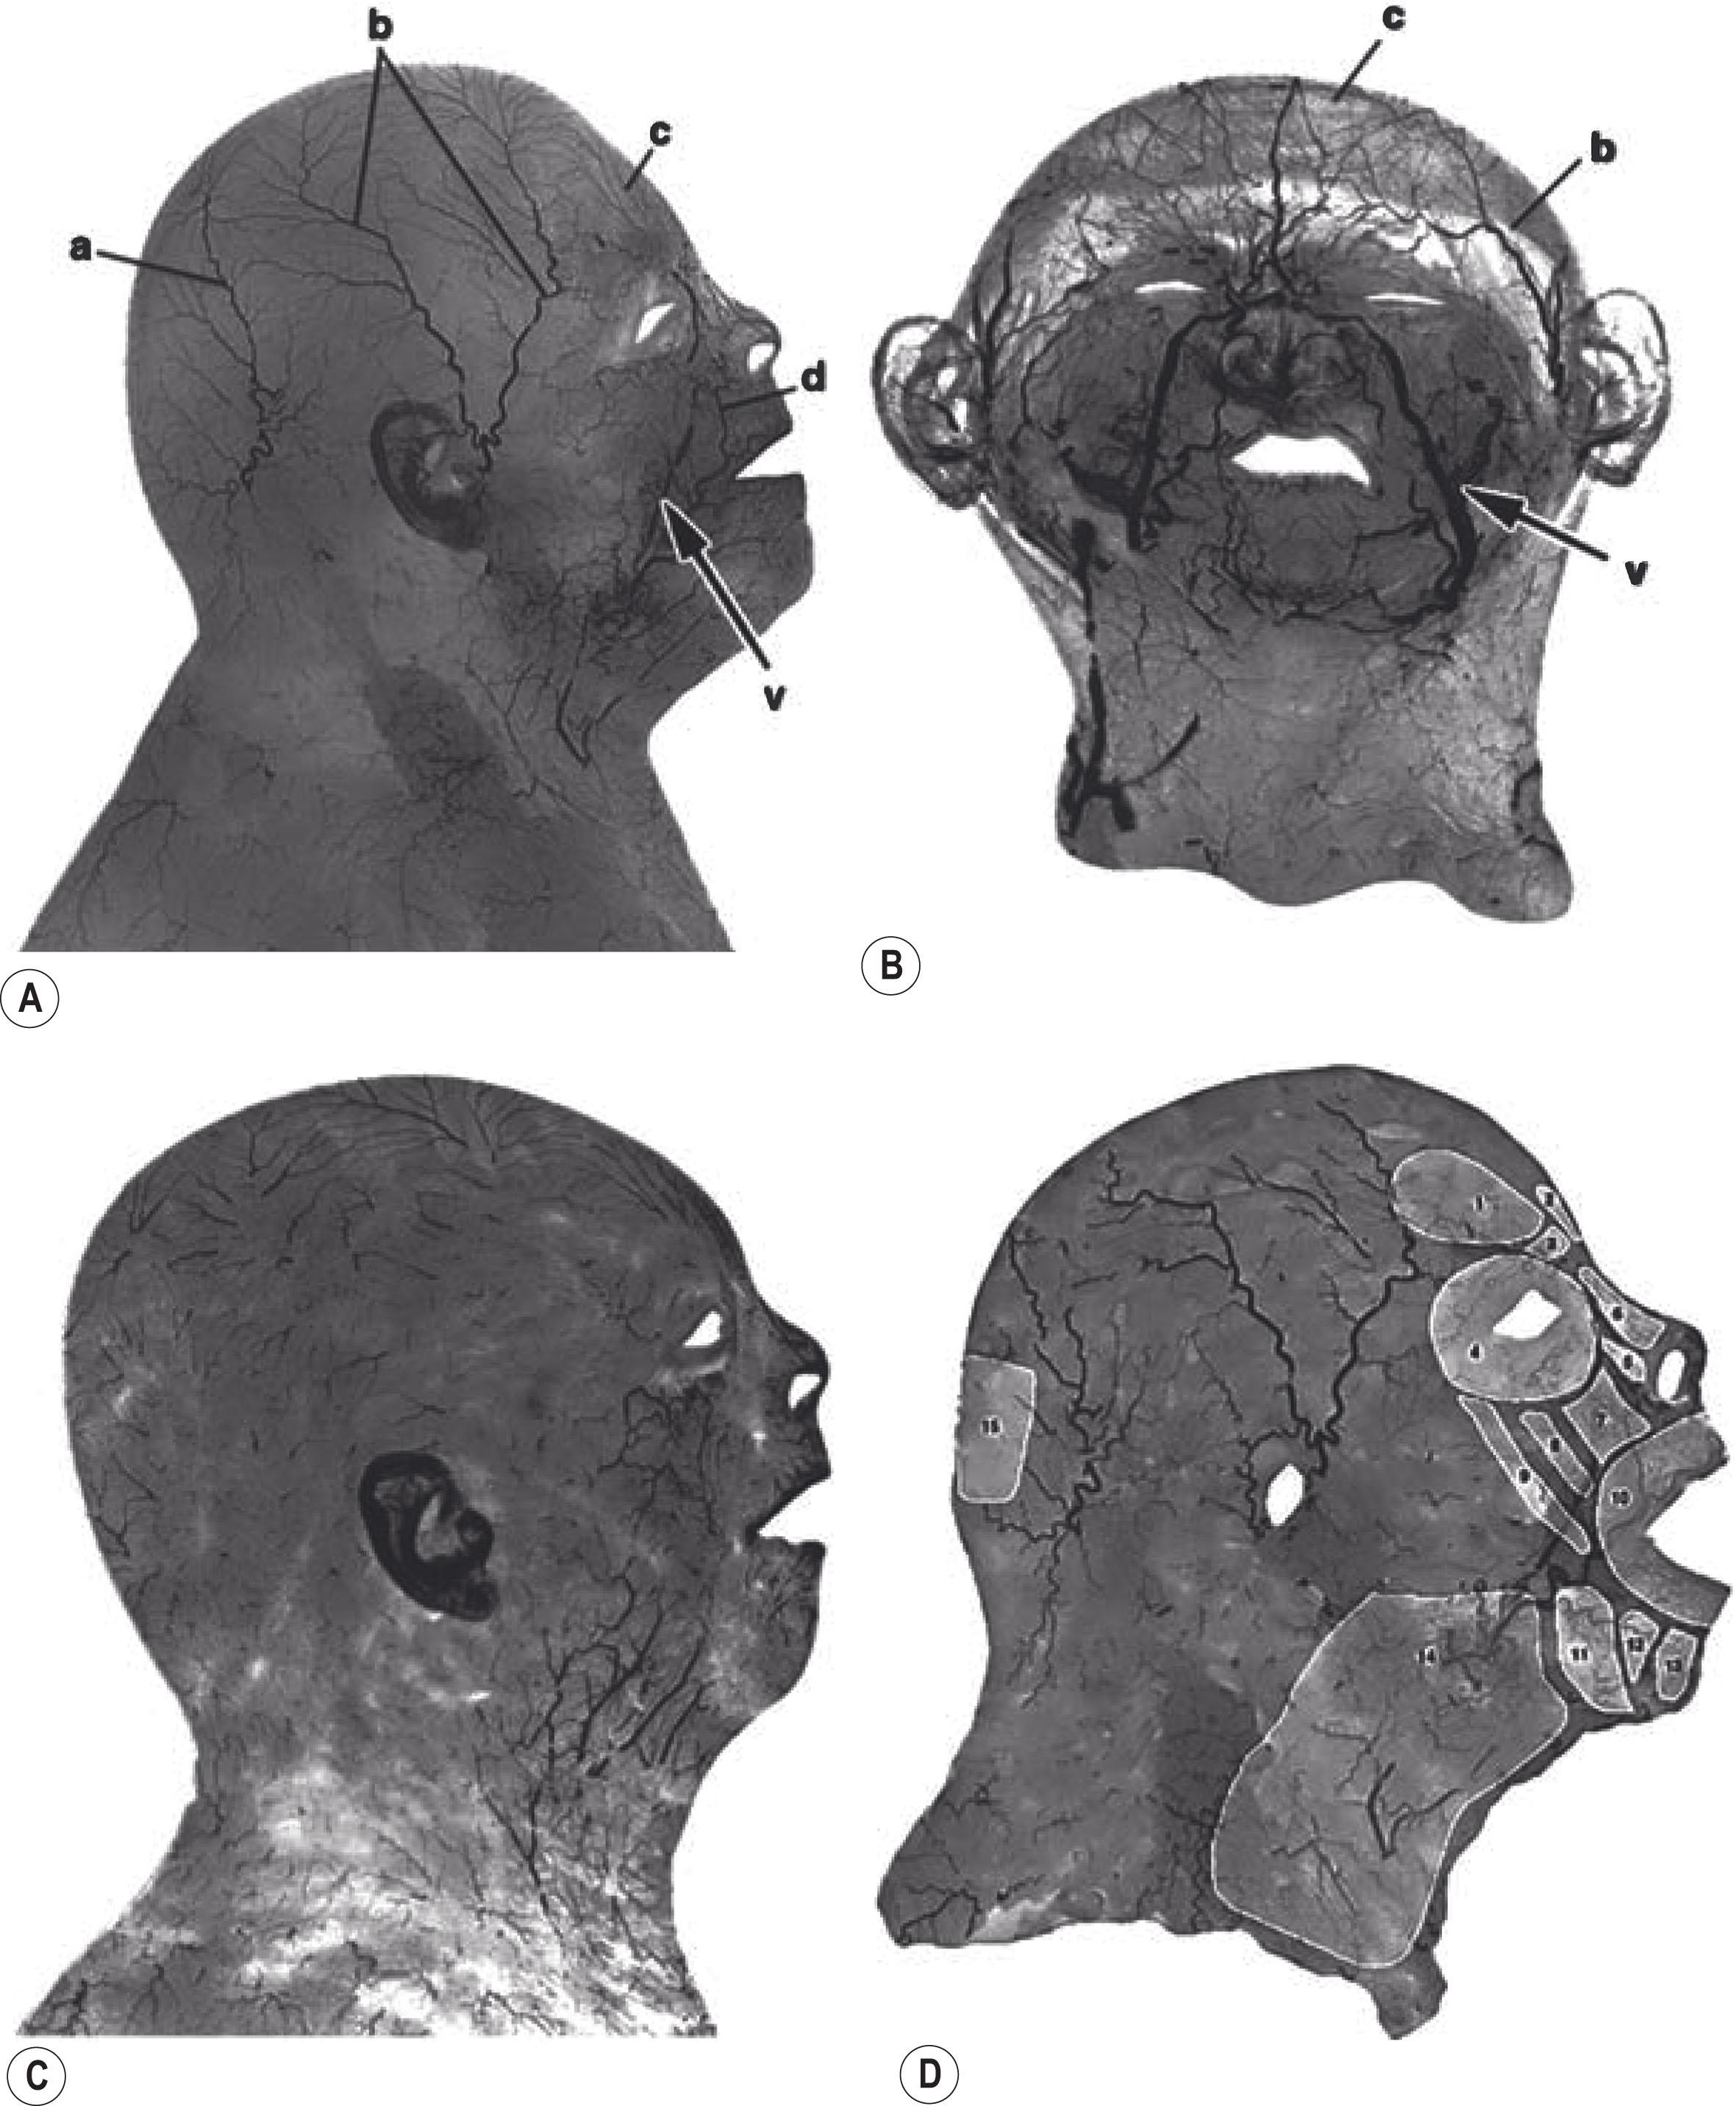 Figure 10.2, ( A–D ) Fresh cadaver lead oxide arterial study of the lateral (A) and anterior (B) view of the composite skin and SMAS unit in the head and neck. The occipital (a), superficial temporal (b), and ophthalmic (c) arteries have been labeled. The facial vein (v) runs a course at some distance from its facial artery counterpart (d). The skin layer alone (C) reveals a vast arterial “blush” area in the mobile cheek and anterior neck. This abundant blood supply makes possible large cervicofacial flaps as well as the myriad other smaller flaps from the cheek and neck possible. The SMAS layer only (D) is seen with the mimetic musculature outlined.